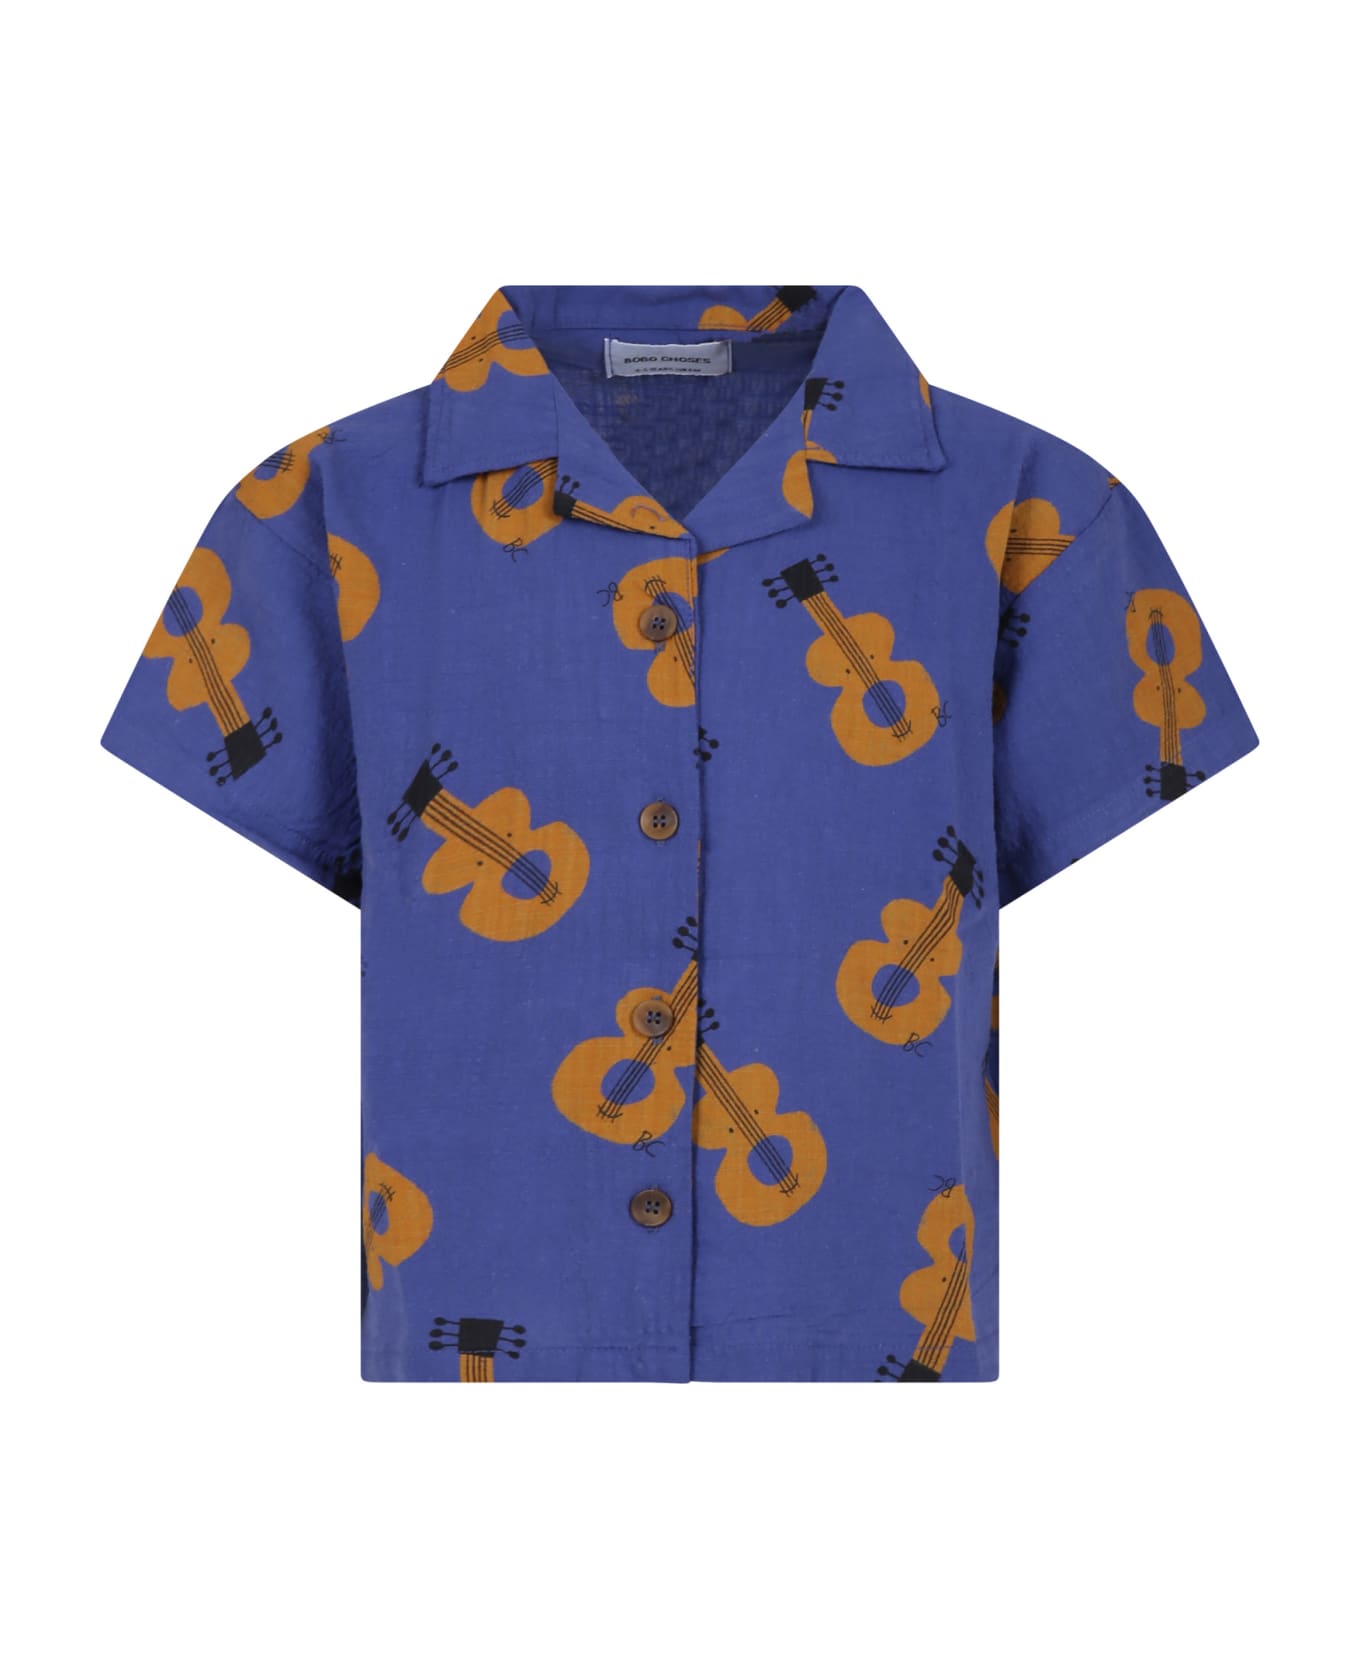 Bobo Choses Blue Shirt For Kids With All-over Guitars - Blue